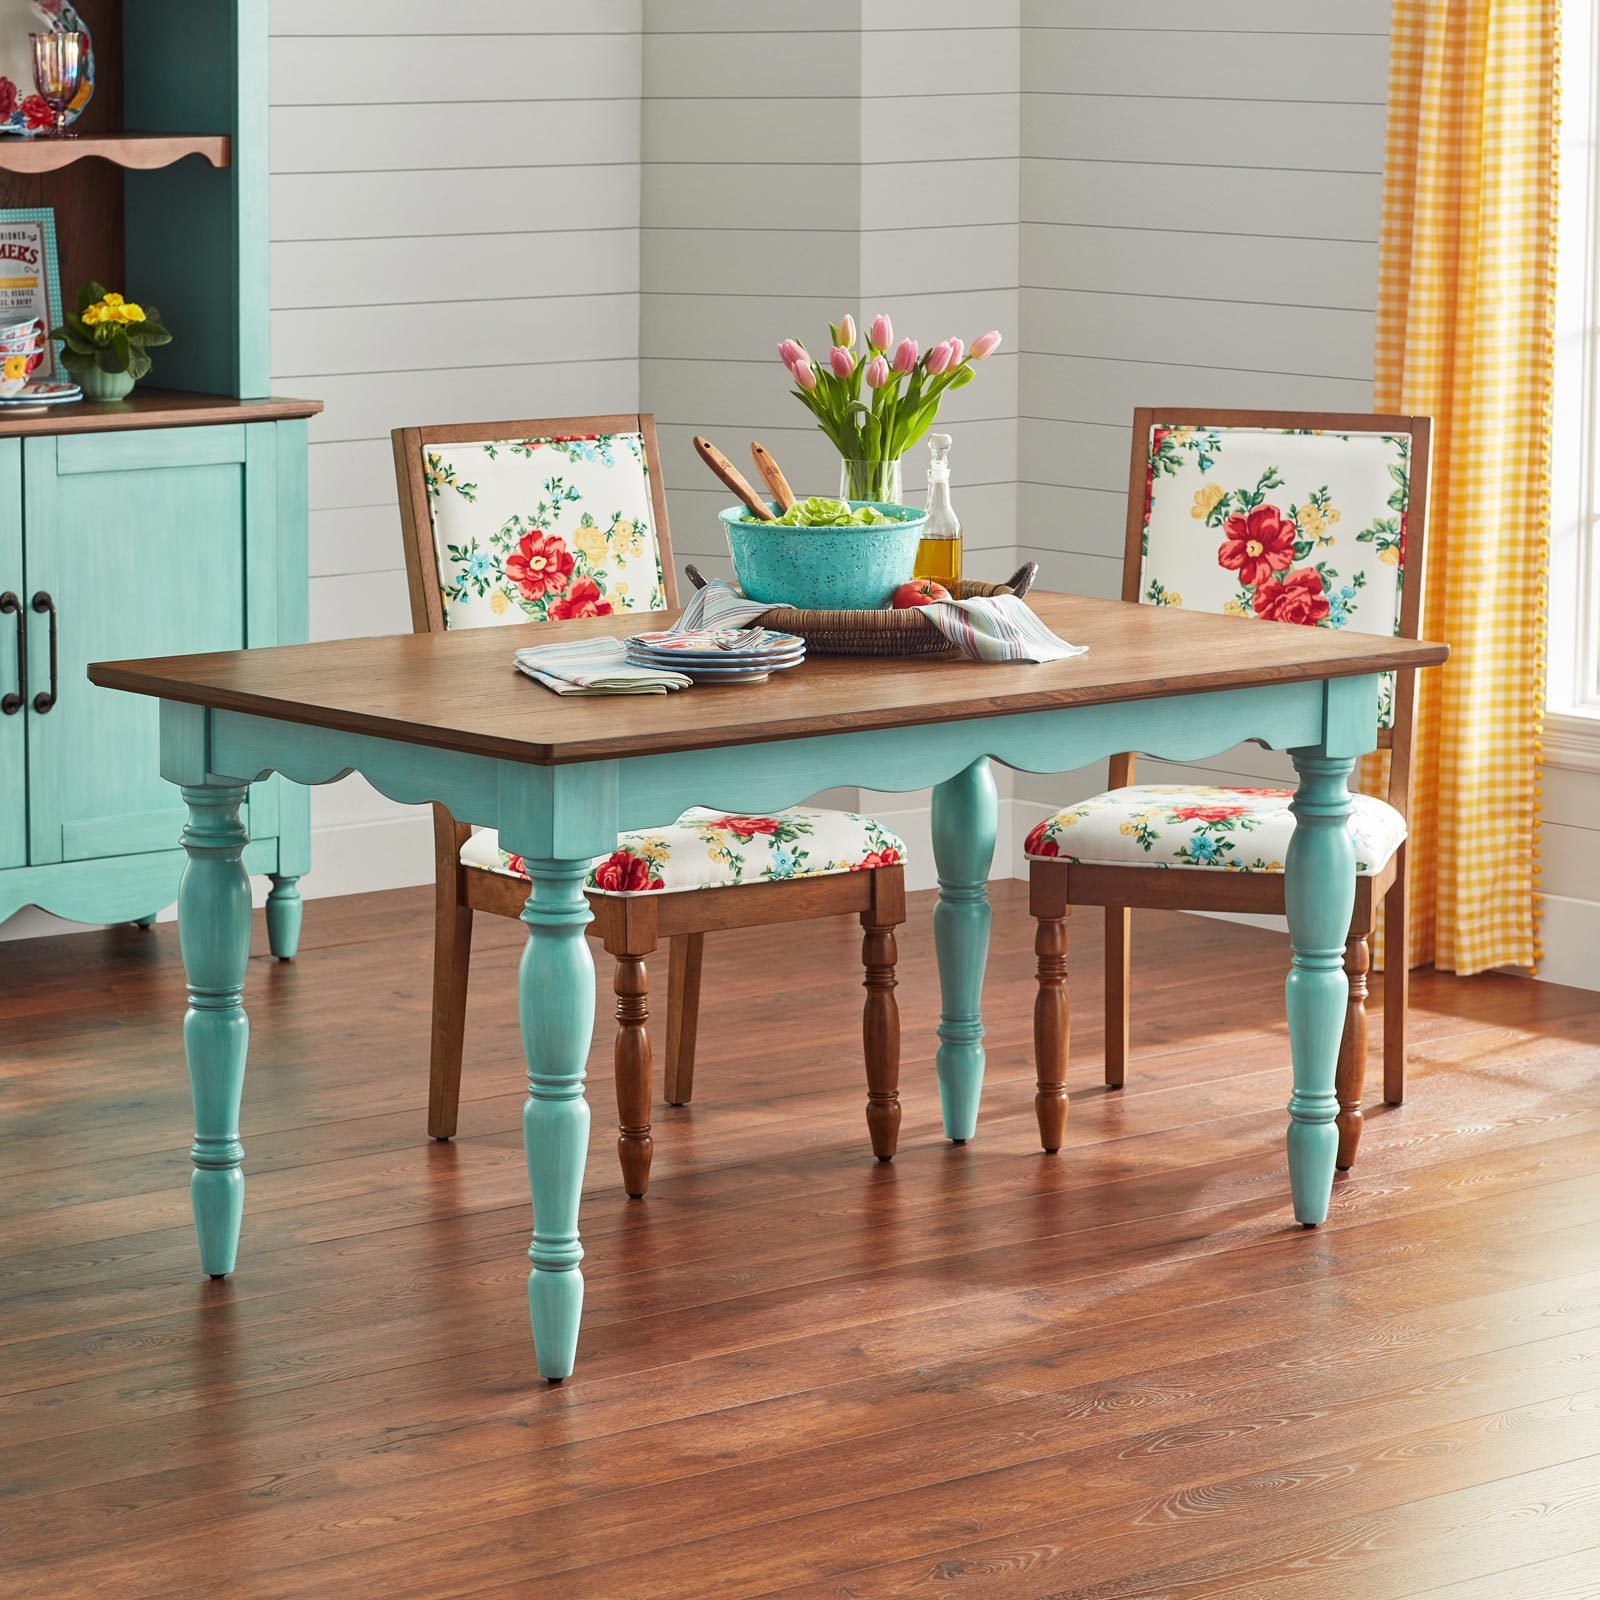 https://www.tasteofhome.com/wp-content/uploads/2023/06/TOH-ecomm-Pioneer-Woman-Furniture-kitchen-table-chairs-hutch-FT-courtesy-walmart.jpg